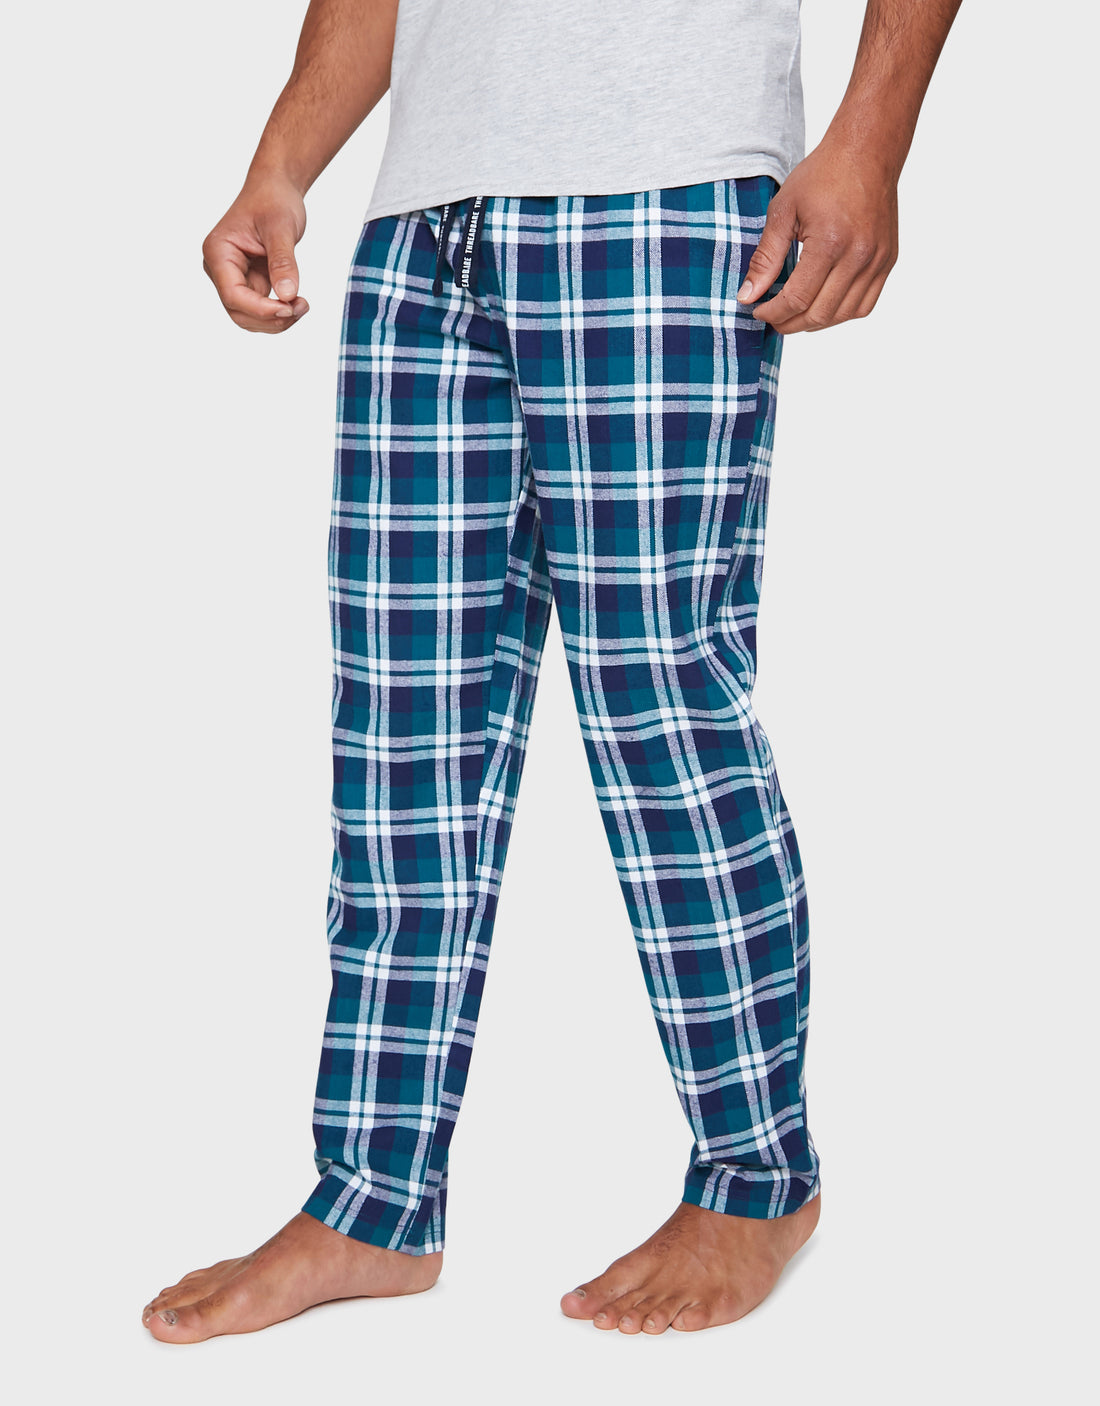 Men's Red & Blue Check Loungewear Pyjama Flannel Trousers (2 Pack ...